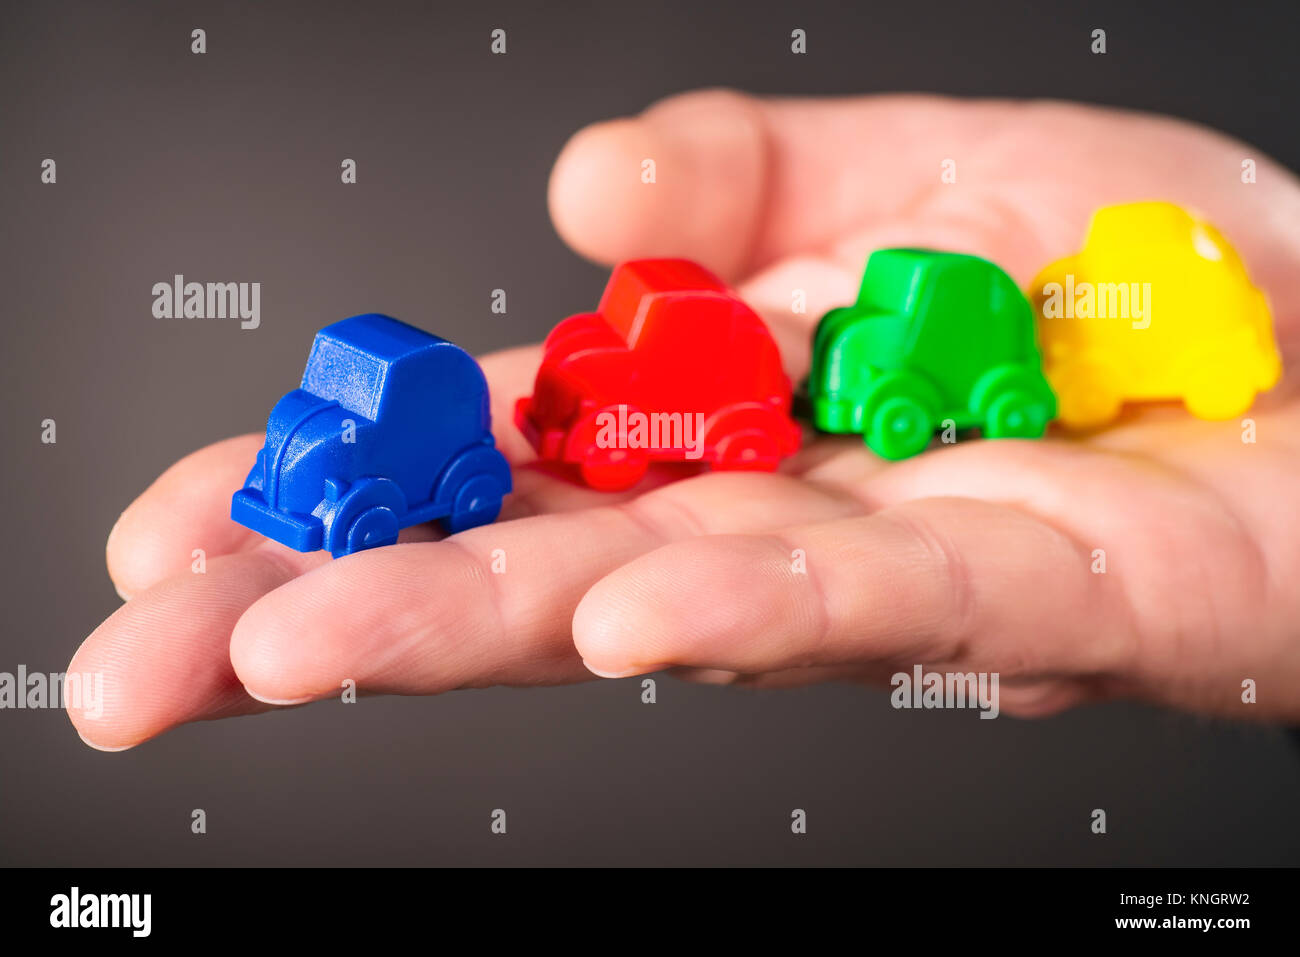 Toy cars in the colors blue, red, green and yellow are carried on a palm. Stock Photo